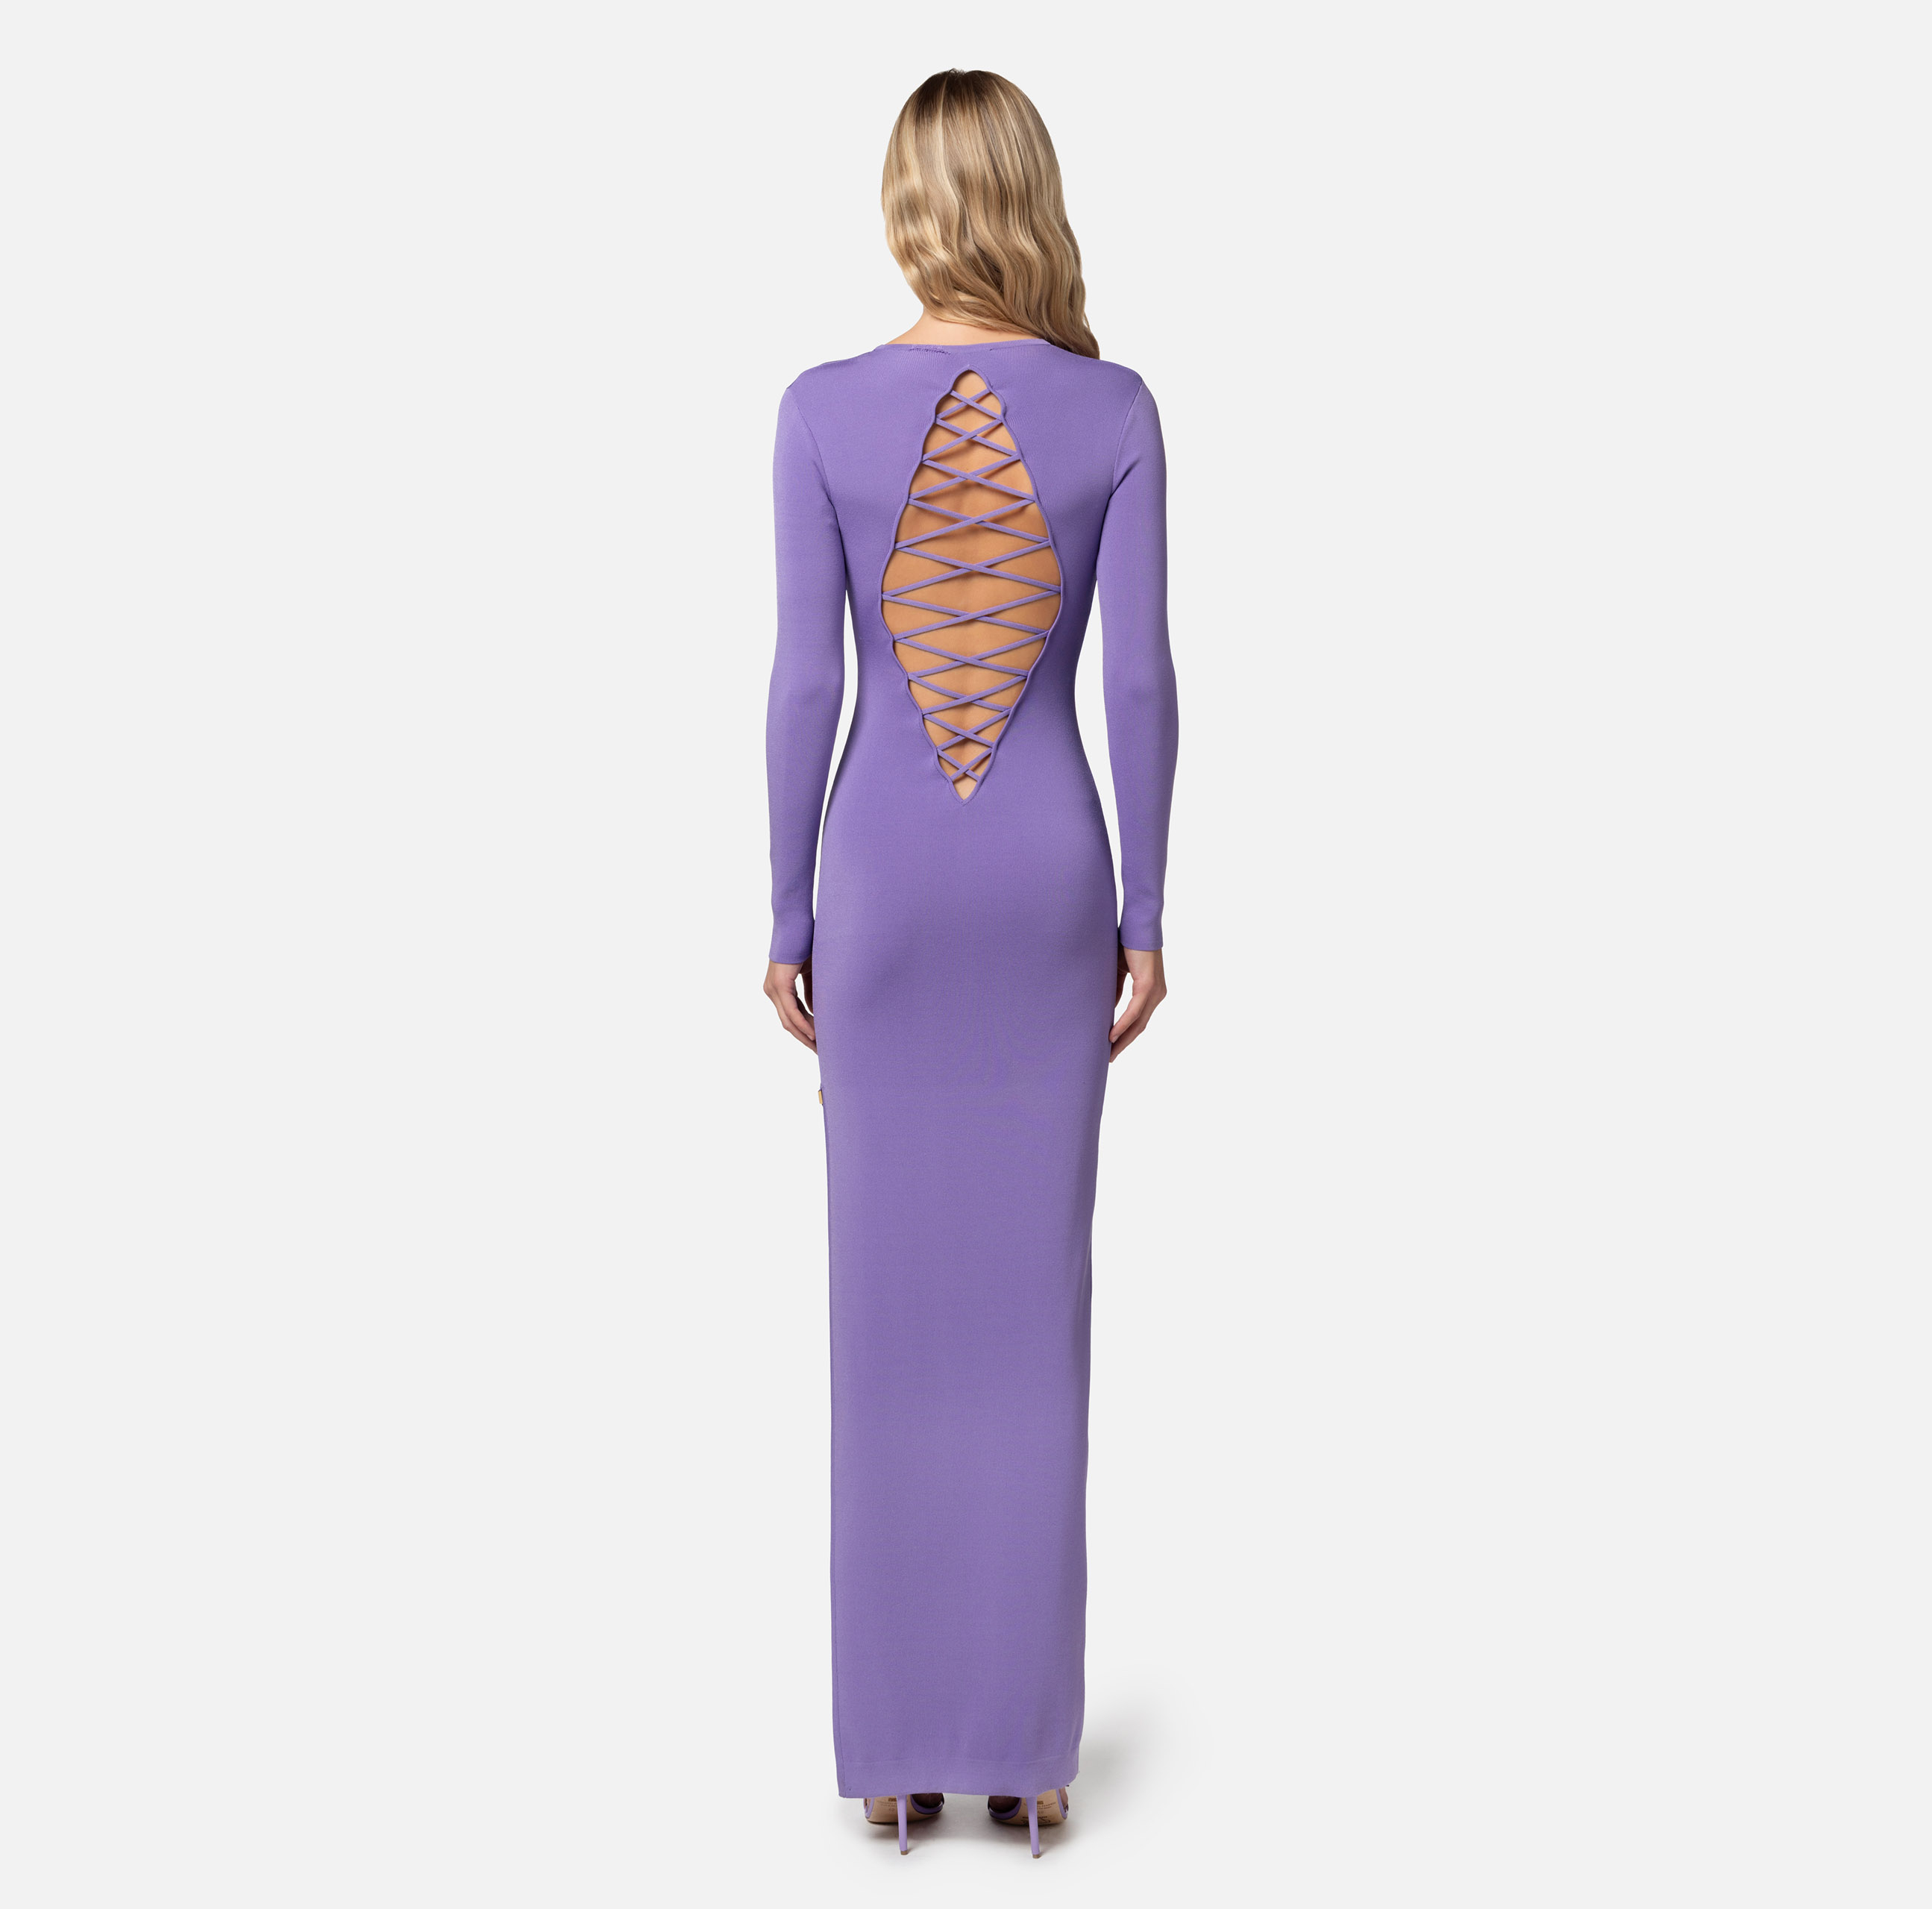 Red carpet dress in rayon with criss-cross pattern - Elisabetta Franchi